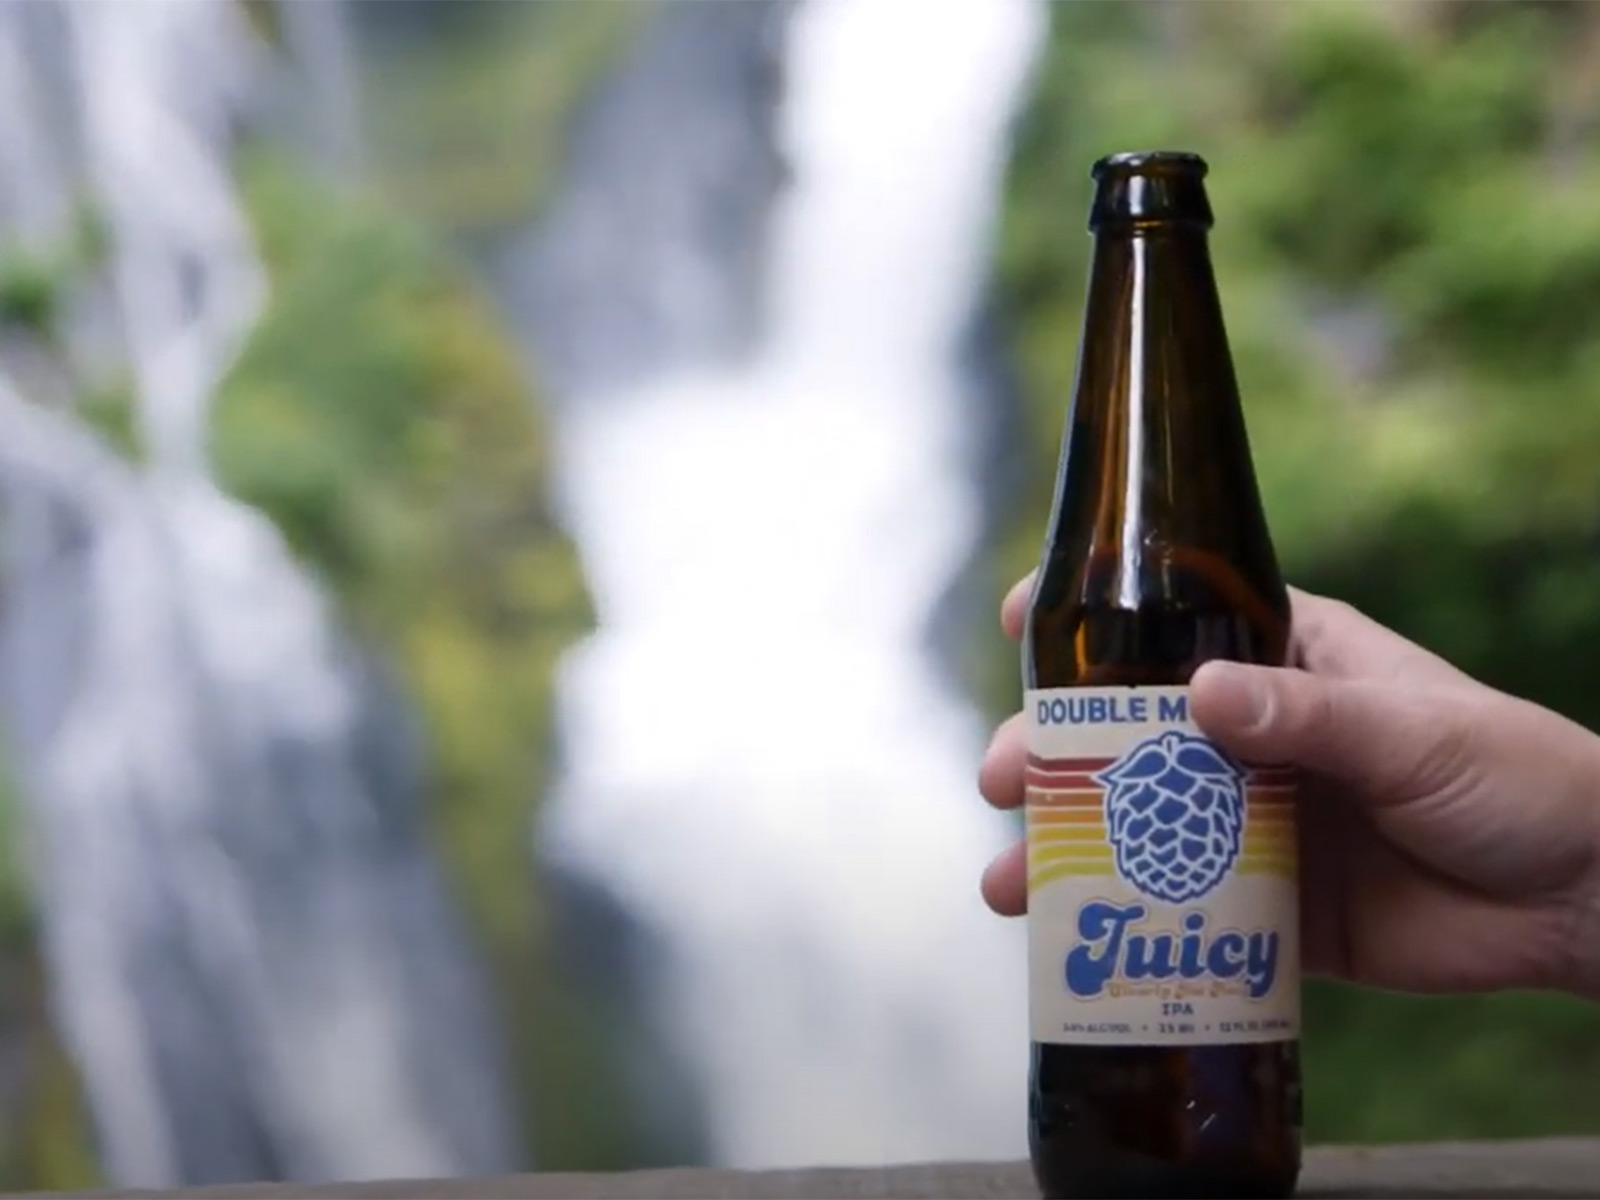 The Refillable Beer Bottle Is Making A Comeback In Oregon - OPB